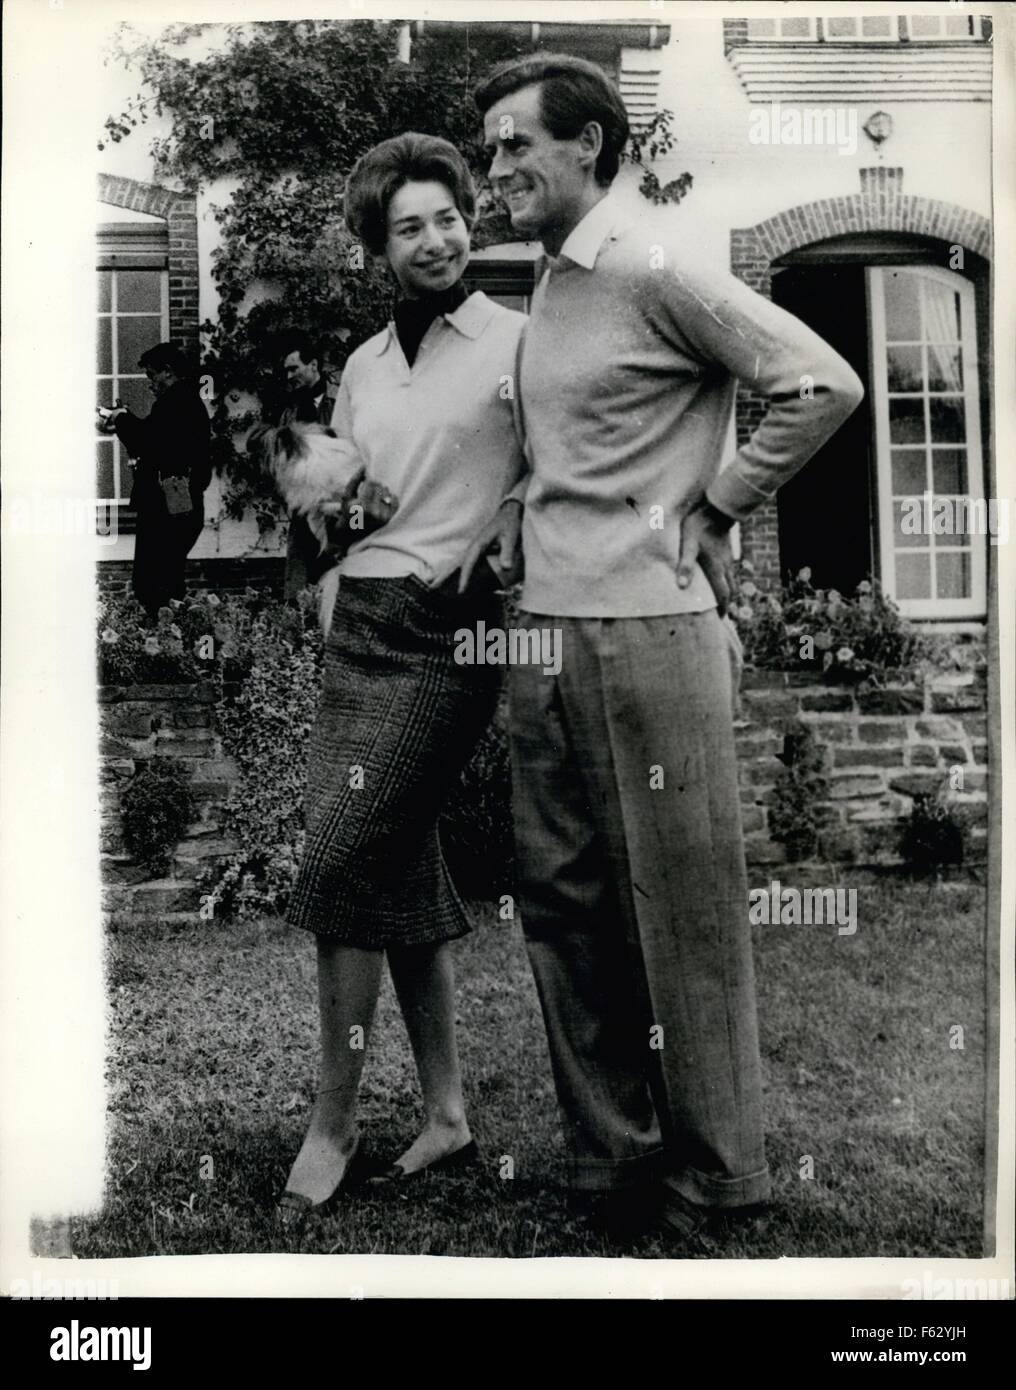 1968 - Group Captain Peter Townsend To Marry His Secretary: The engagement has been officially announced of Group Captain Peter Townsend former suitor Princess Margaret - and 20 year old Marie-Luce Jamagne daughter of a wealthy Belgian cigarette manufacturer. Photo Shows Peter Townsend and Marie Luce Jamagne at the latter's home near Antwerp today. © Keystone Pictures USA/ZUMAPRESS.com/Alamy Live News Stock Photo